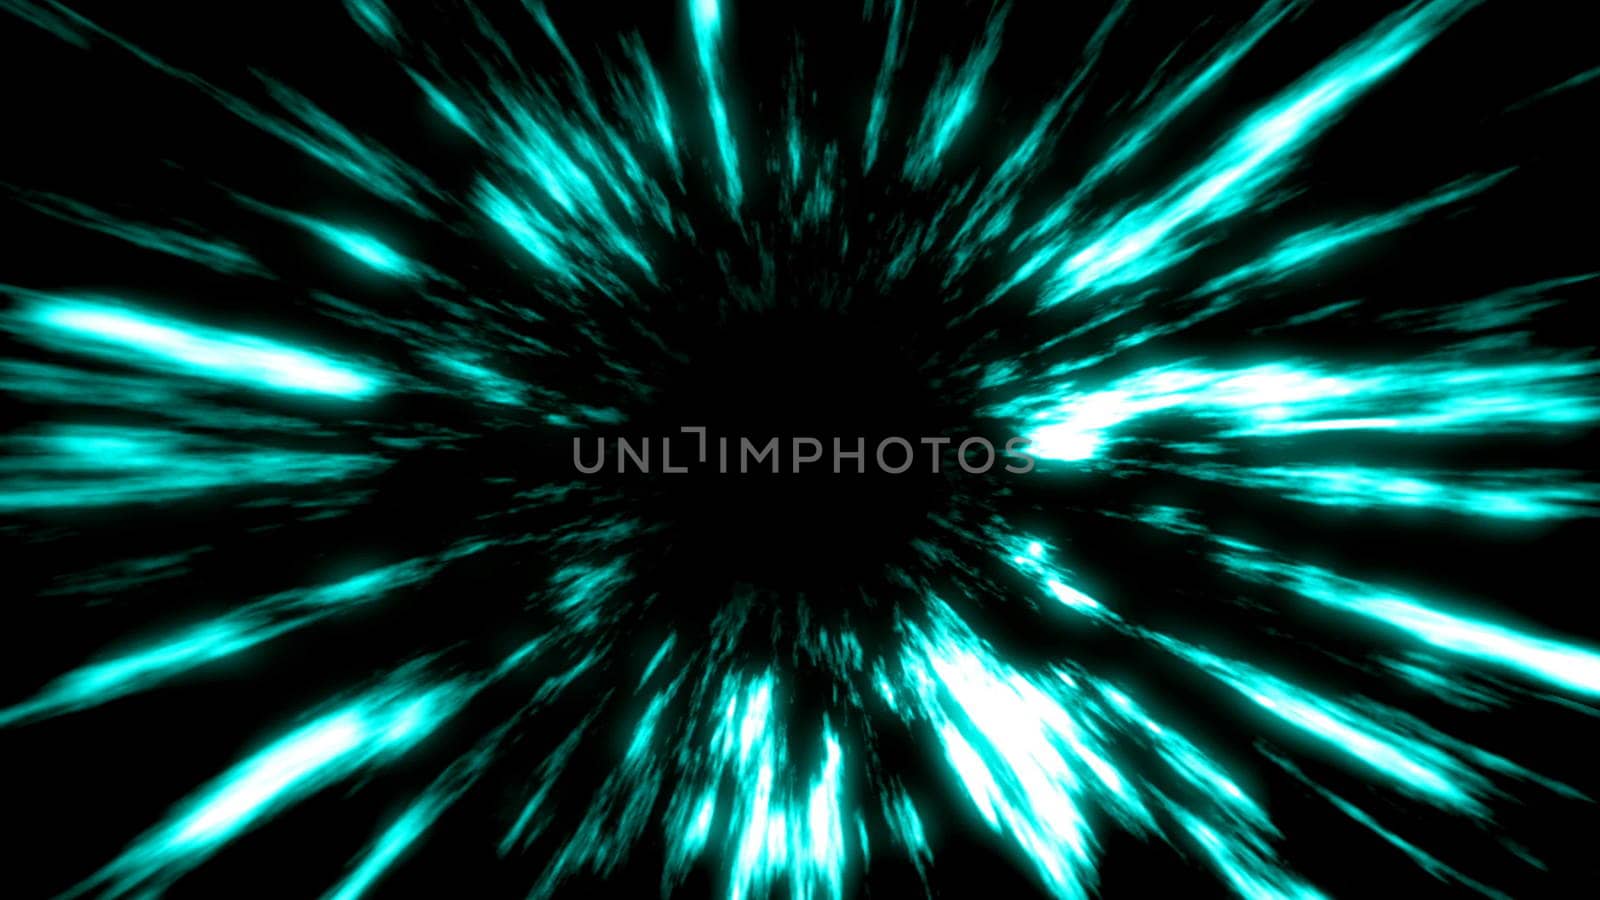 Futuristic light tunnel. Abstract background with black hole